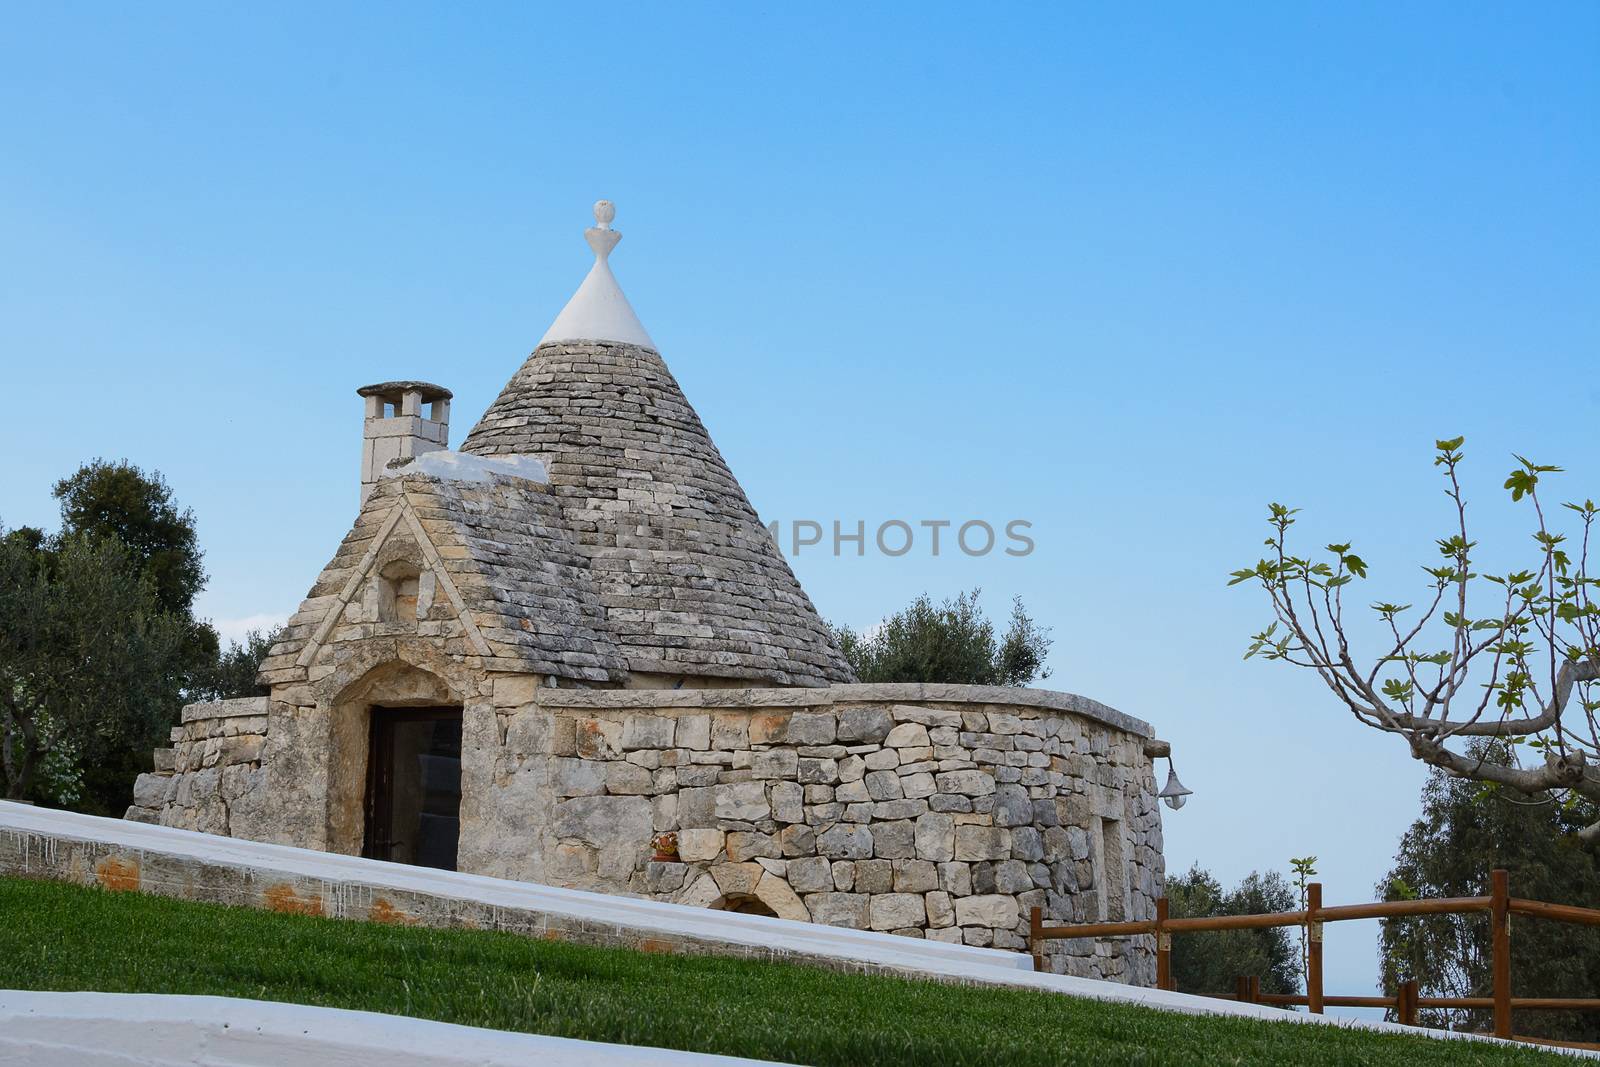 Trullo building typical of Italy built in stone